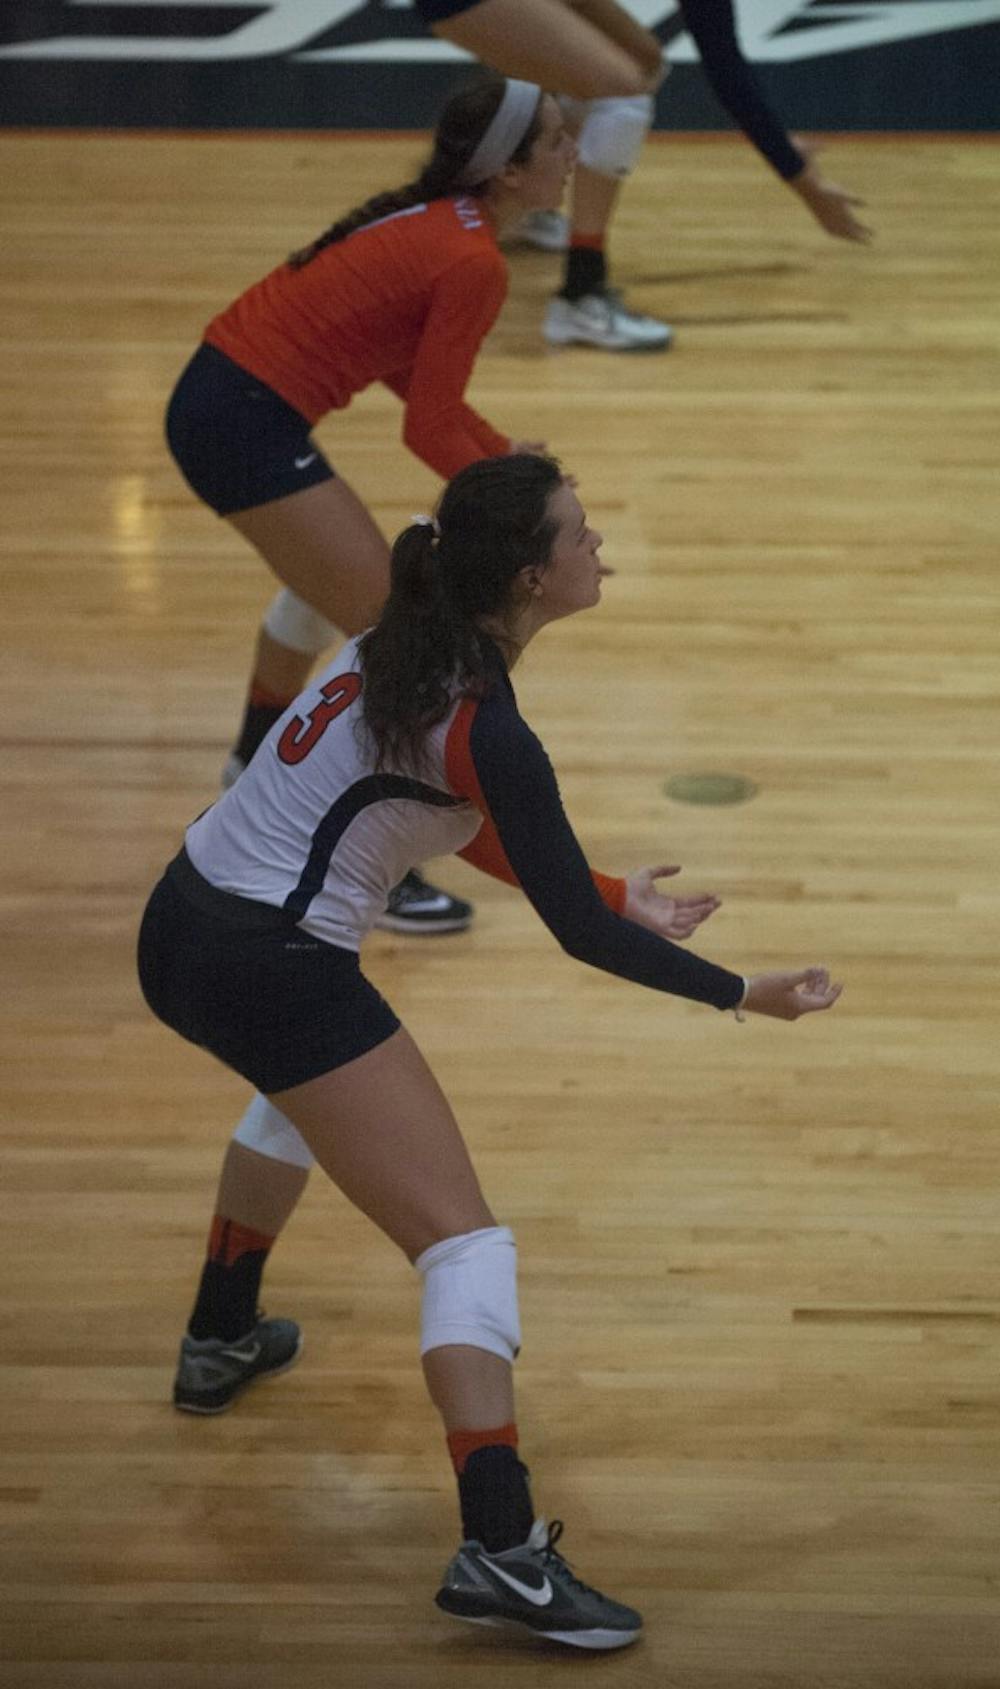 <p>Freshman defensive specialist Kelsey Miller and the Virginia volleyball team will seek to turn their fortunes this weekend against Florida State and Miami.</p>